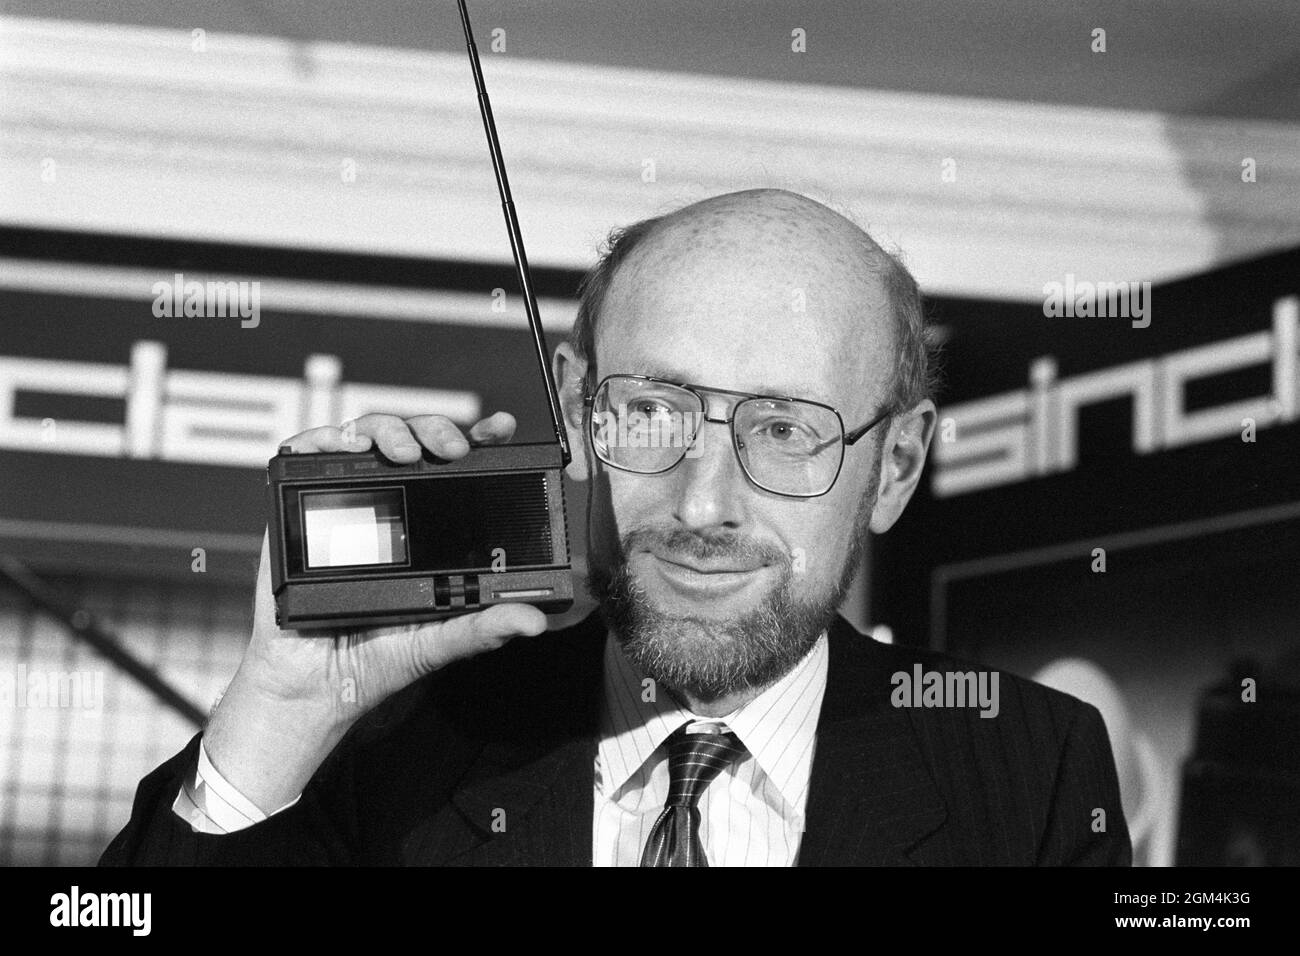 File photo dated 16/10/83 of Sir Clive Sinclair, founder and chairman of Sinclair Research, at the launch of the Sinclair 2-inch pocket television. Home computing pioneer Sir Clive Sinclair has died at the age of 81, according to reports. Issue date: Thursday September 16, 2021. Stock Photo